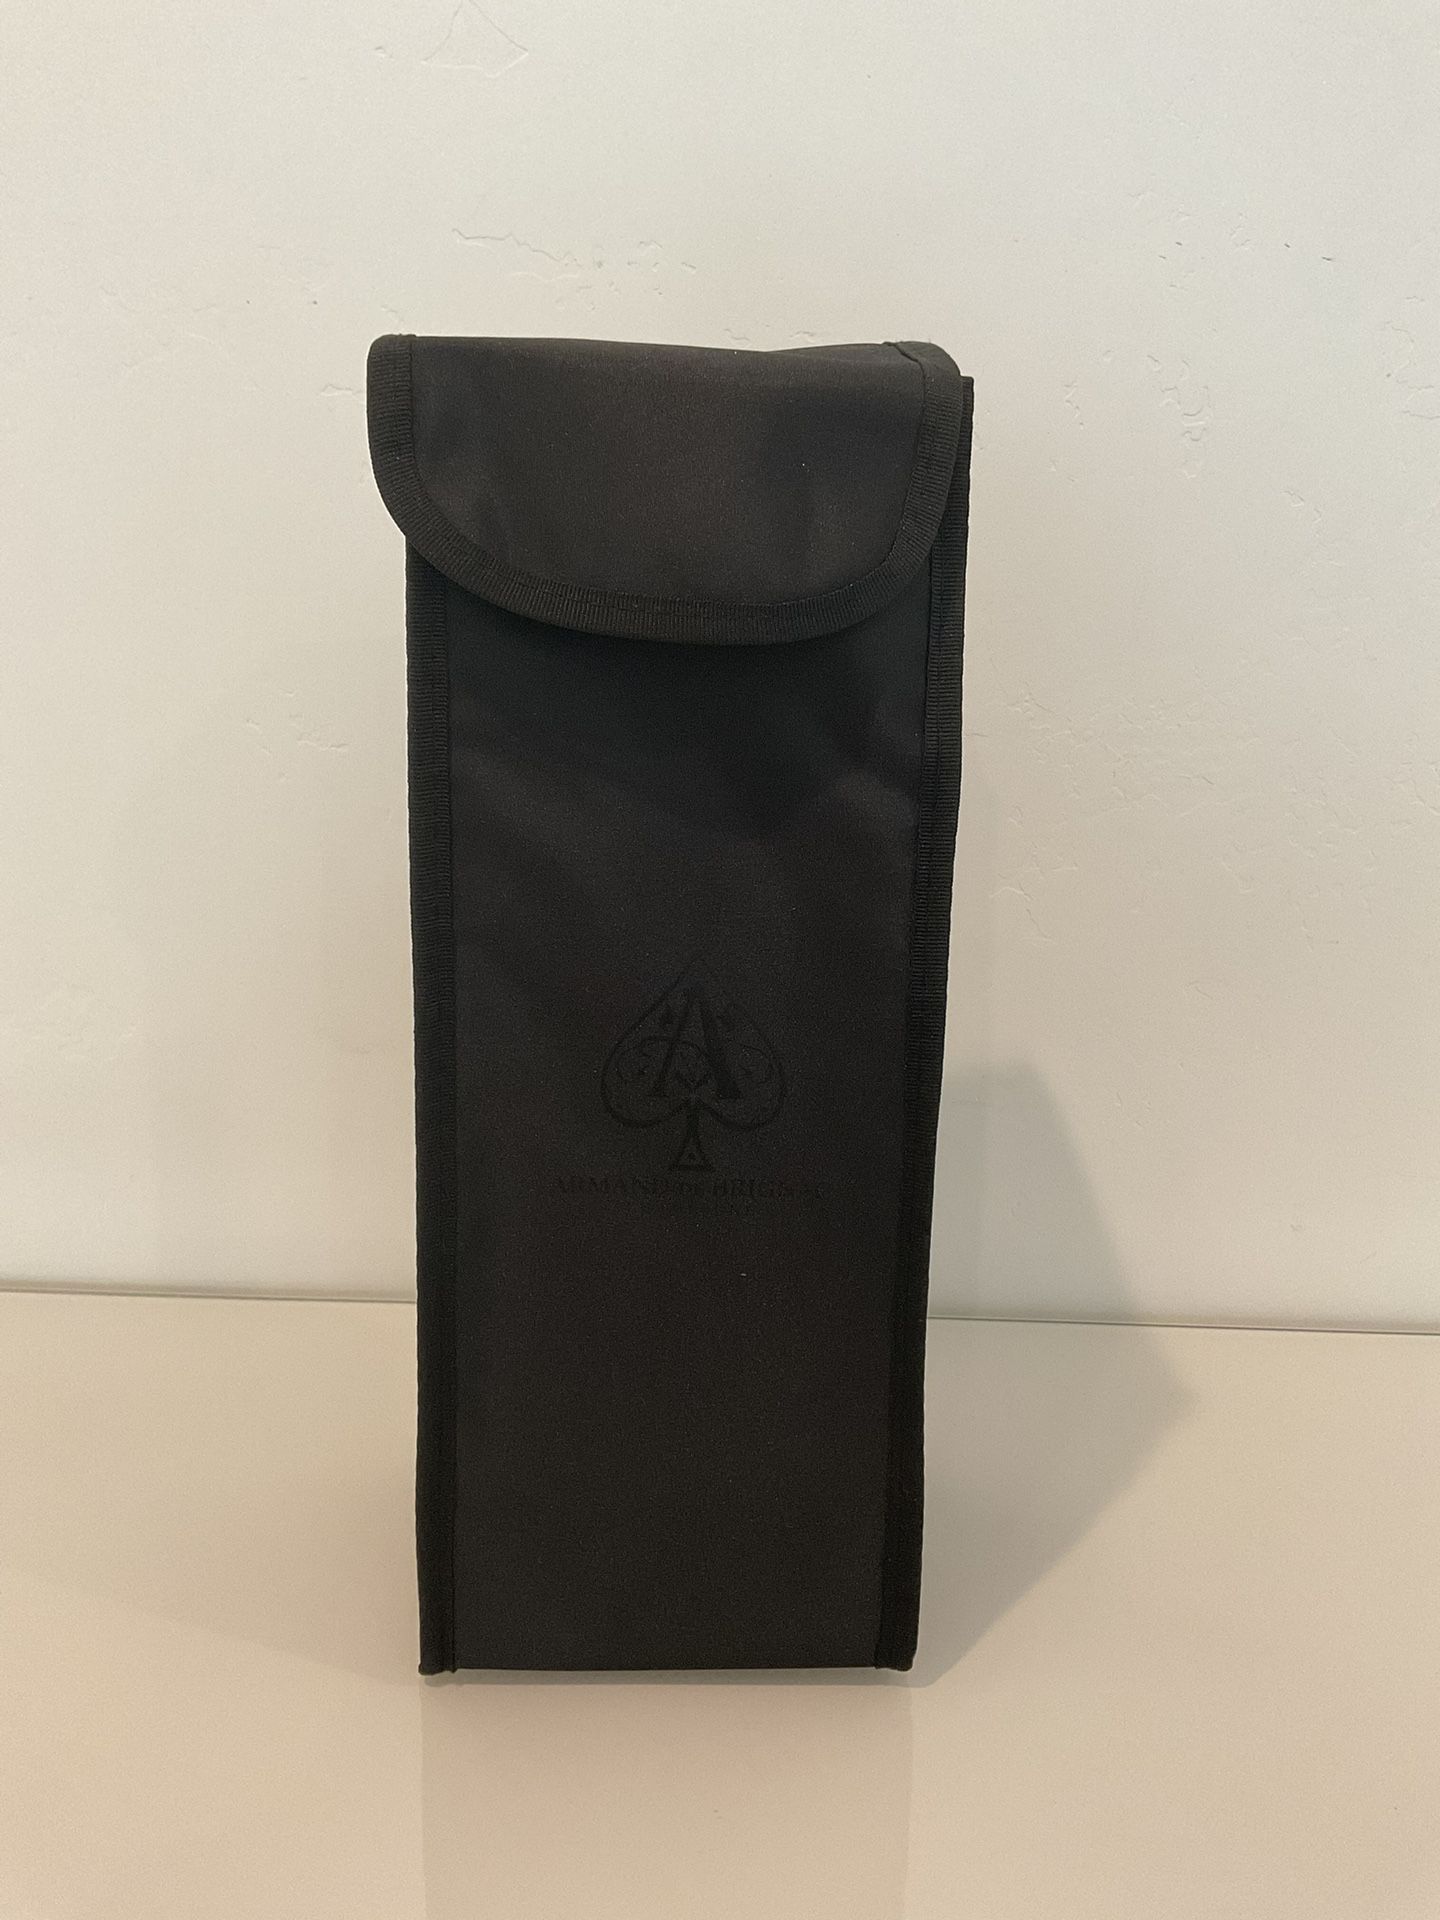 ACE OF SPADES Armand De Brignac Brut Champagne Carrying Bag Black BRAND NEW, NEVER USED, PERFECT!!!